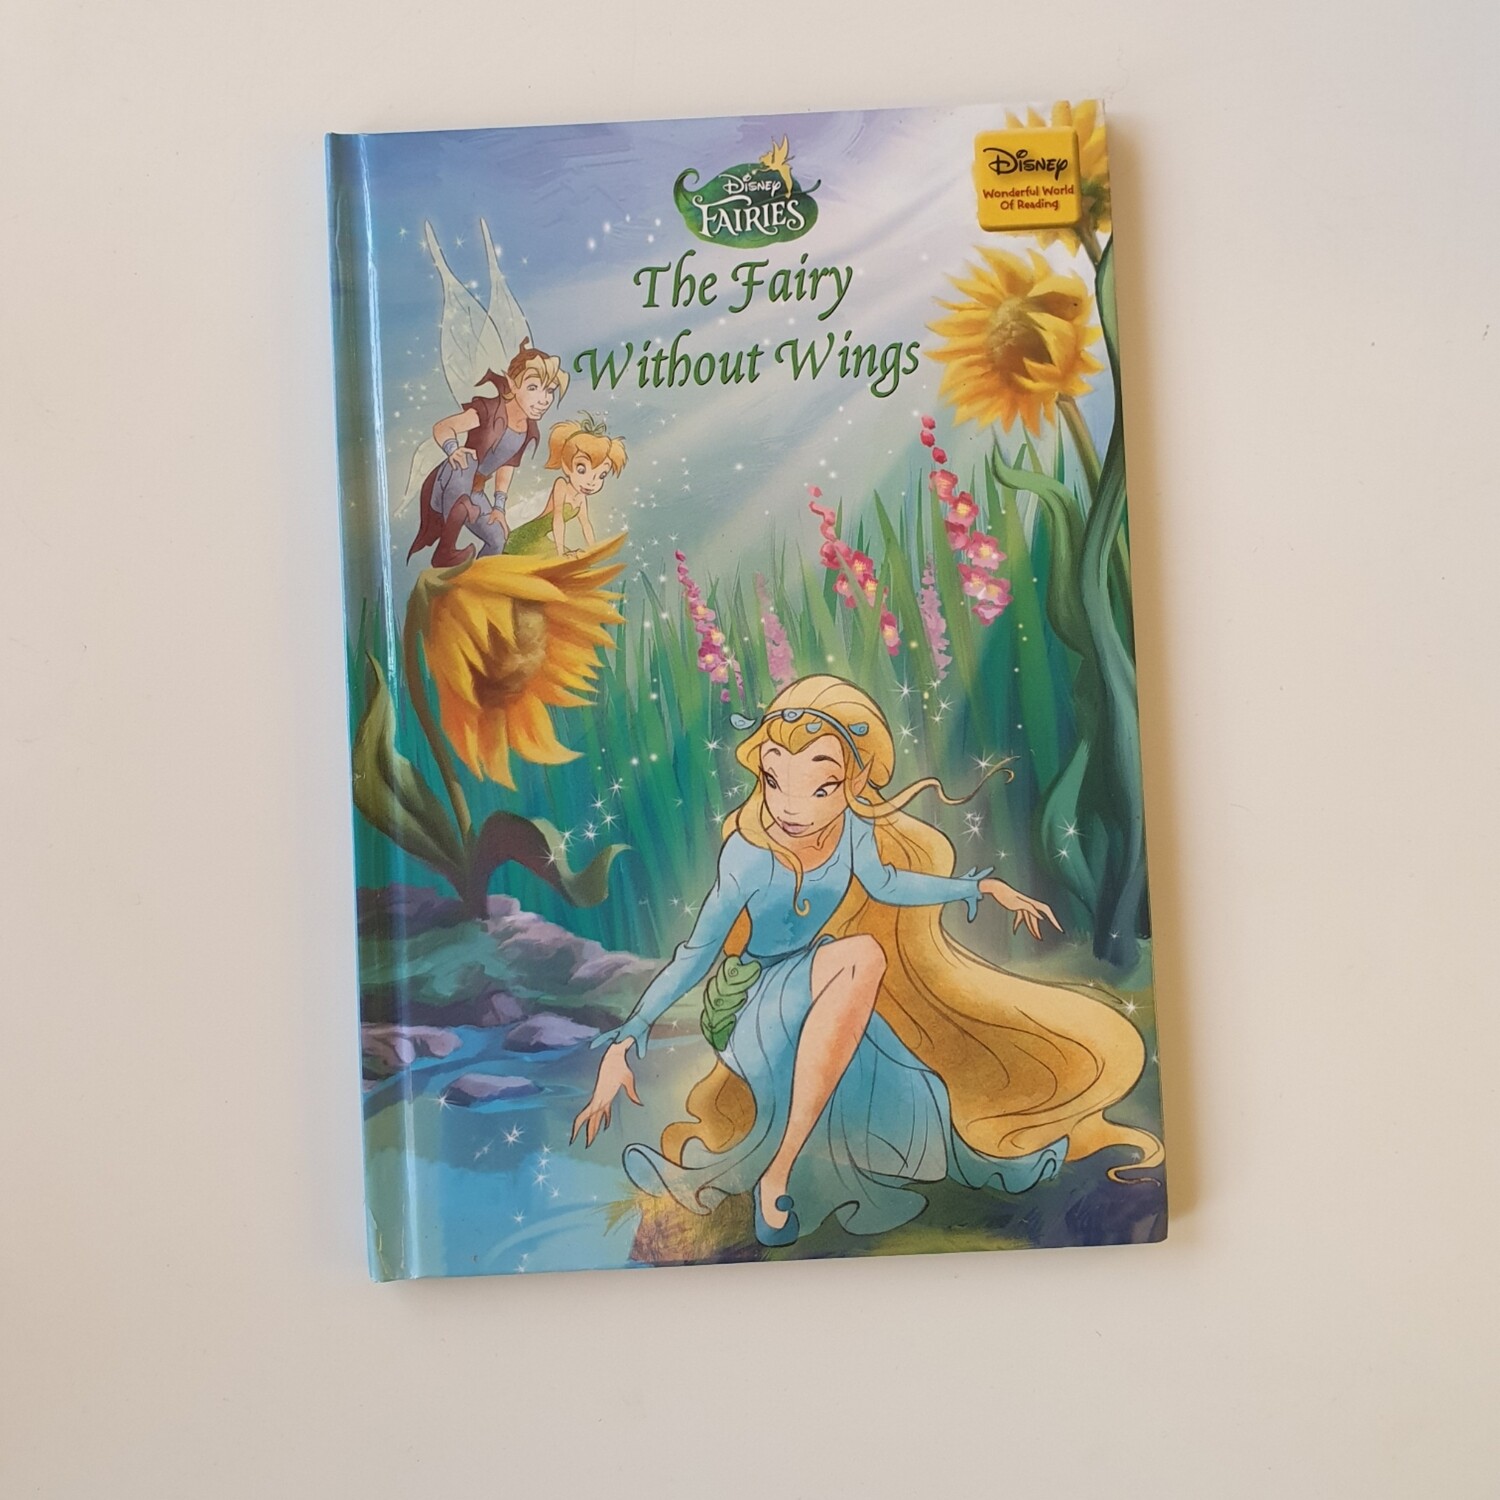 Disney Fairies - the fairy without wings Notebook